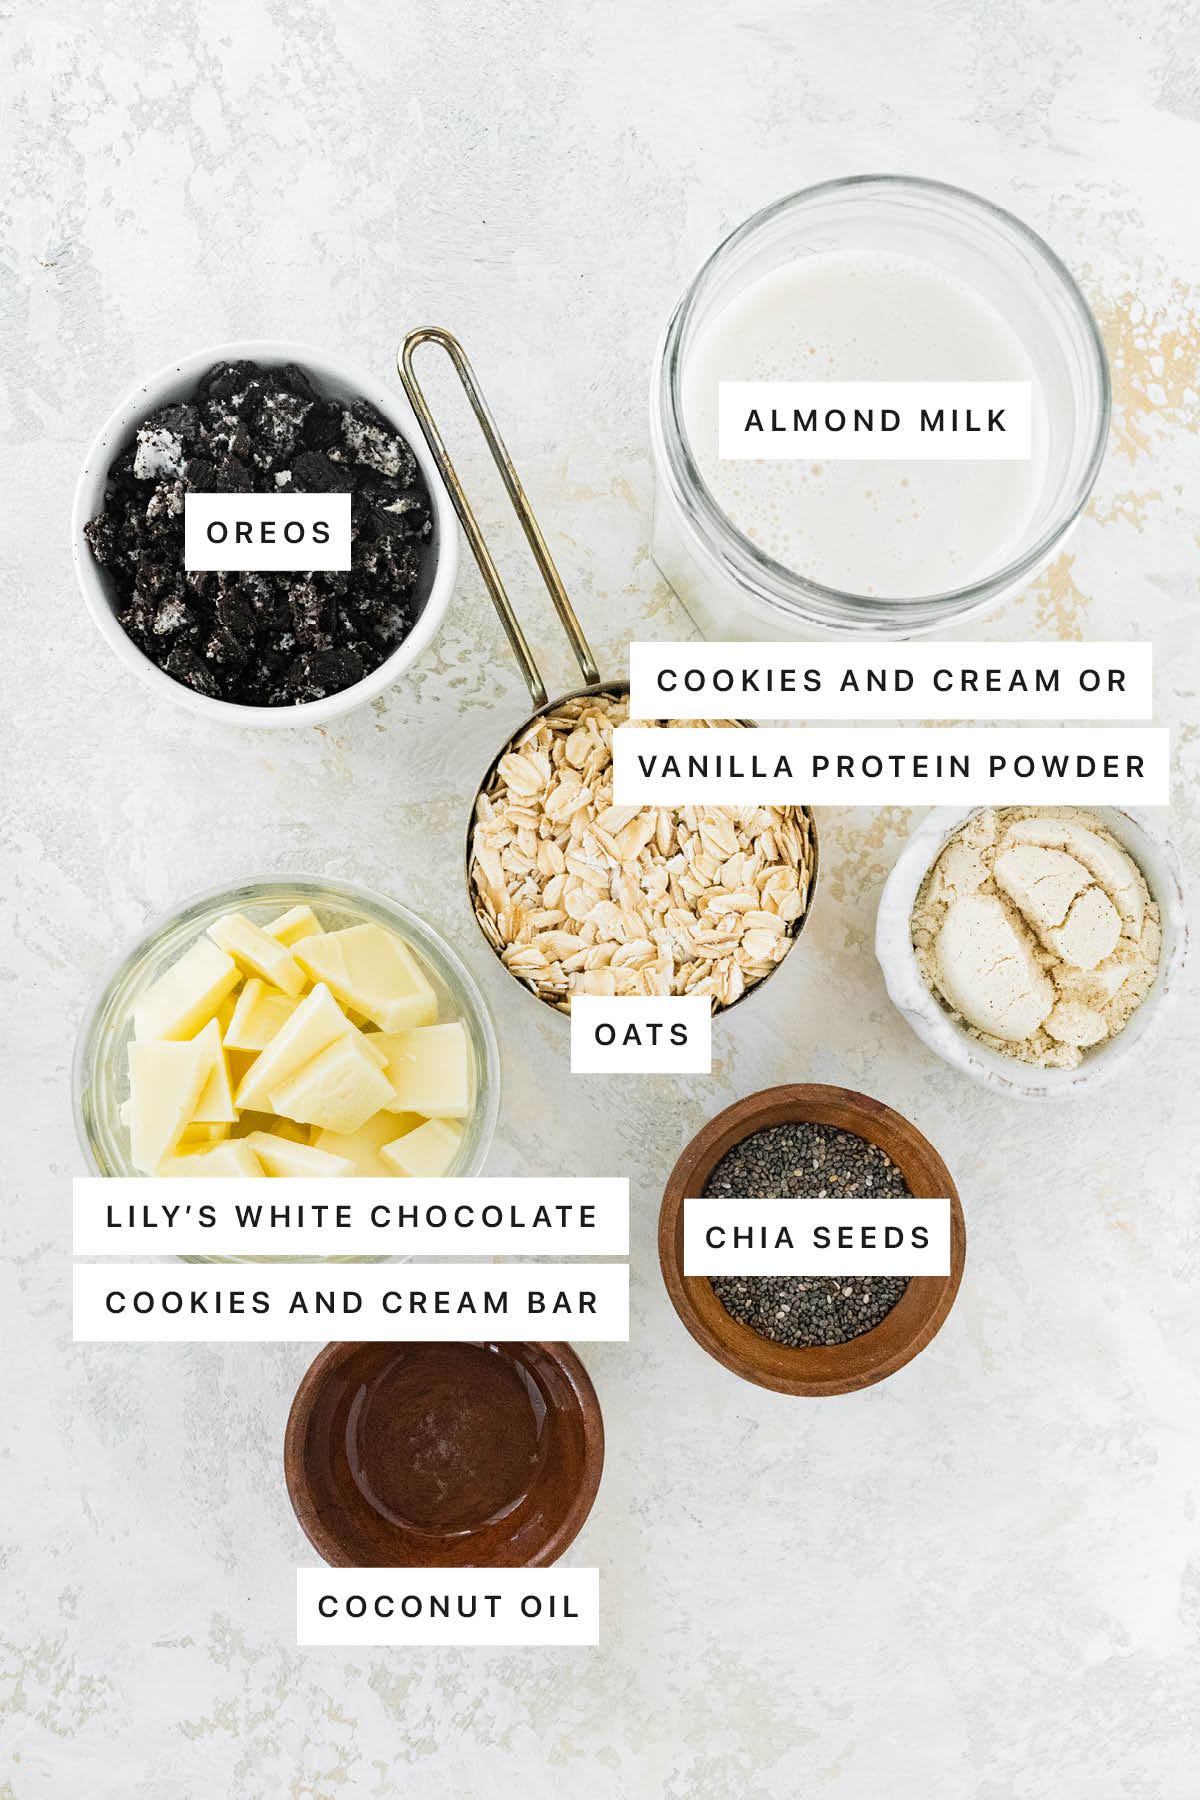 Ingredients measured out to make Cookies and Cream Overnight Oats: Oreos, almond milk, protein powder, oats, white chocolate, chia seeds and coconut oil.